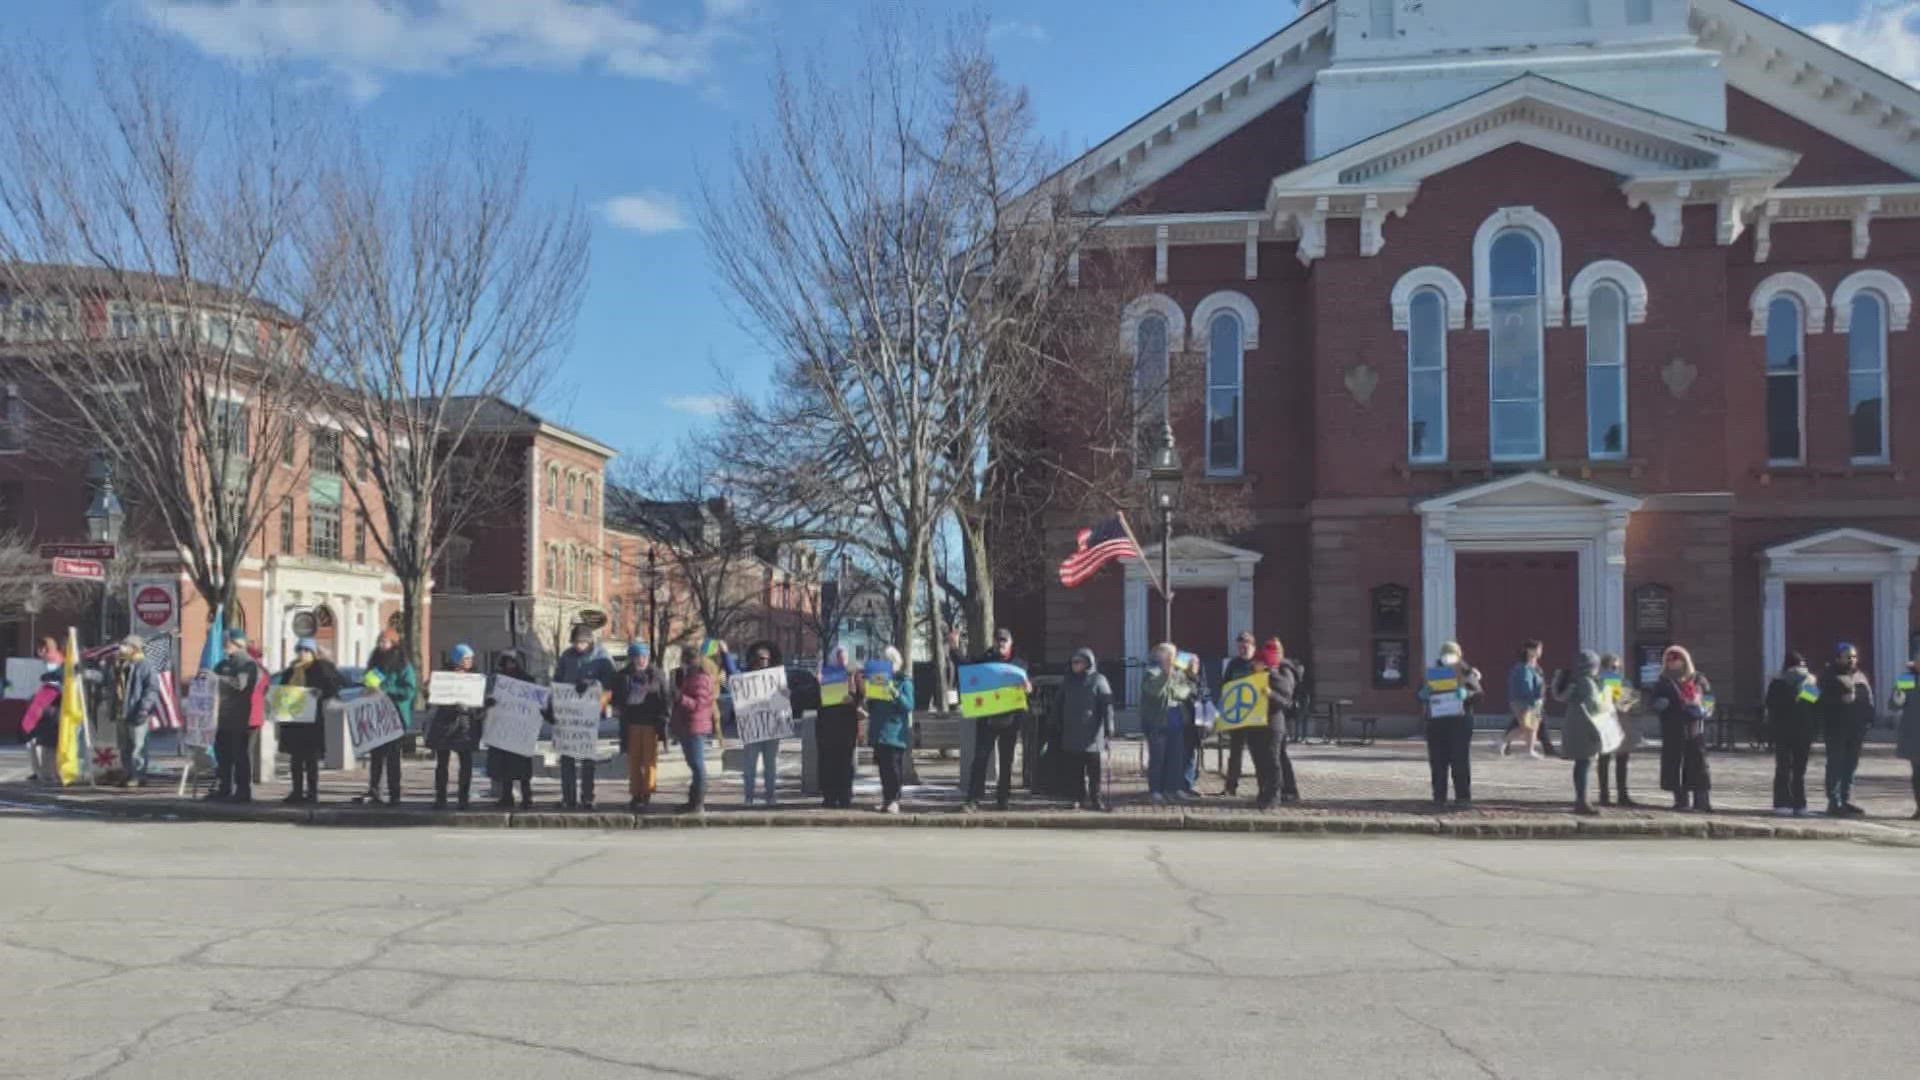 A group has planned to gather in Market Square in Portsmouth, New Hampshire, on March 20 to protest Russia's invasion of Ukraine.